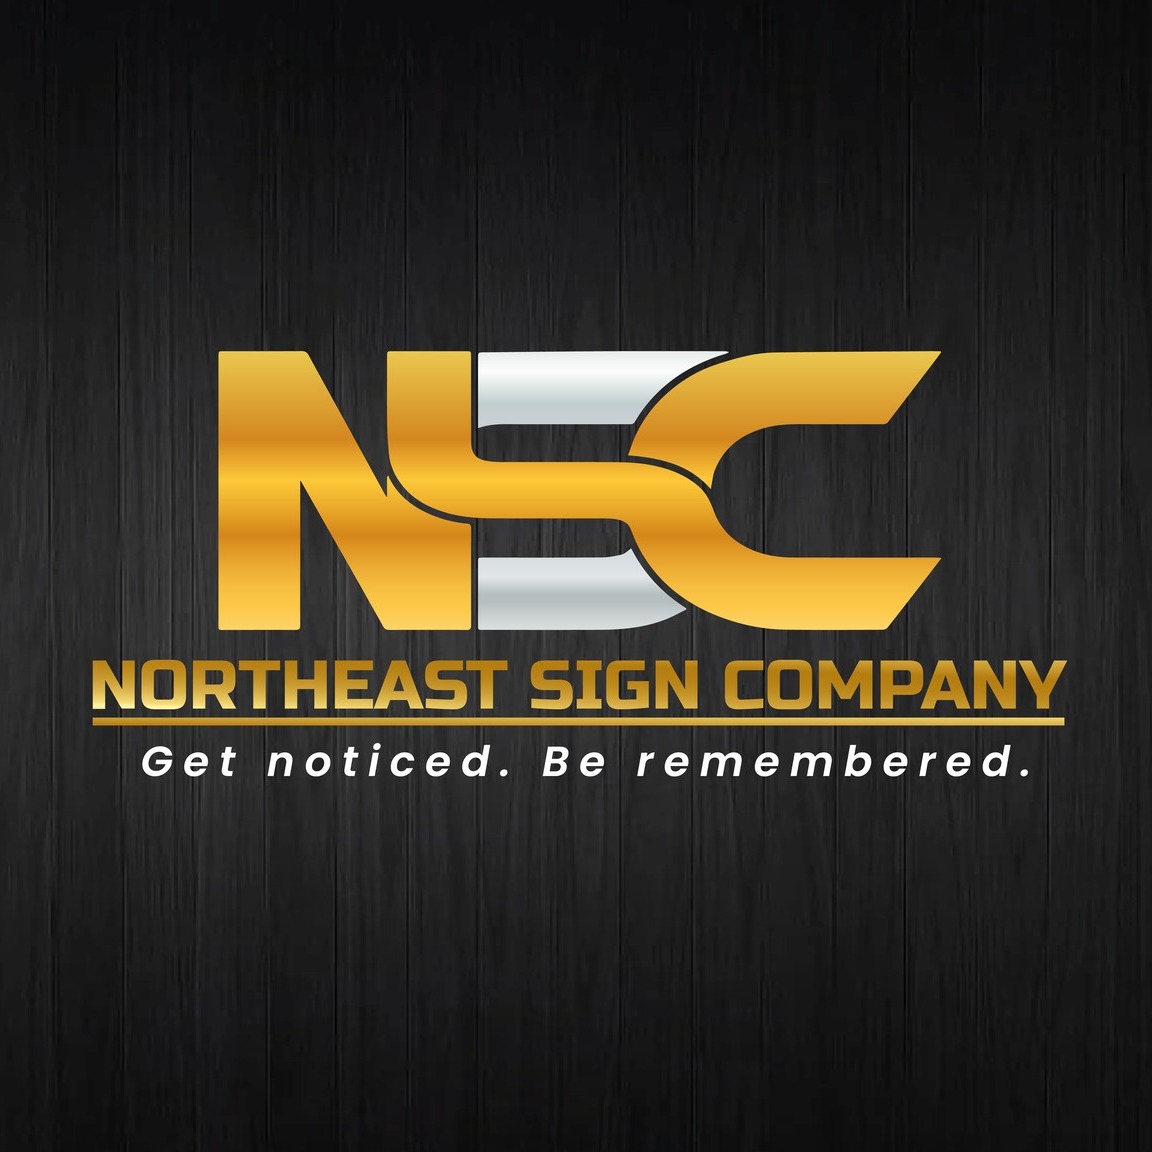 Business logo of Northeast Sign Company